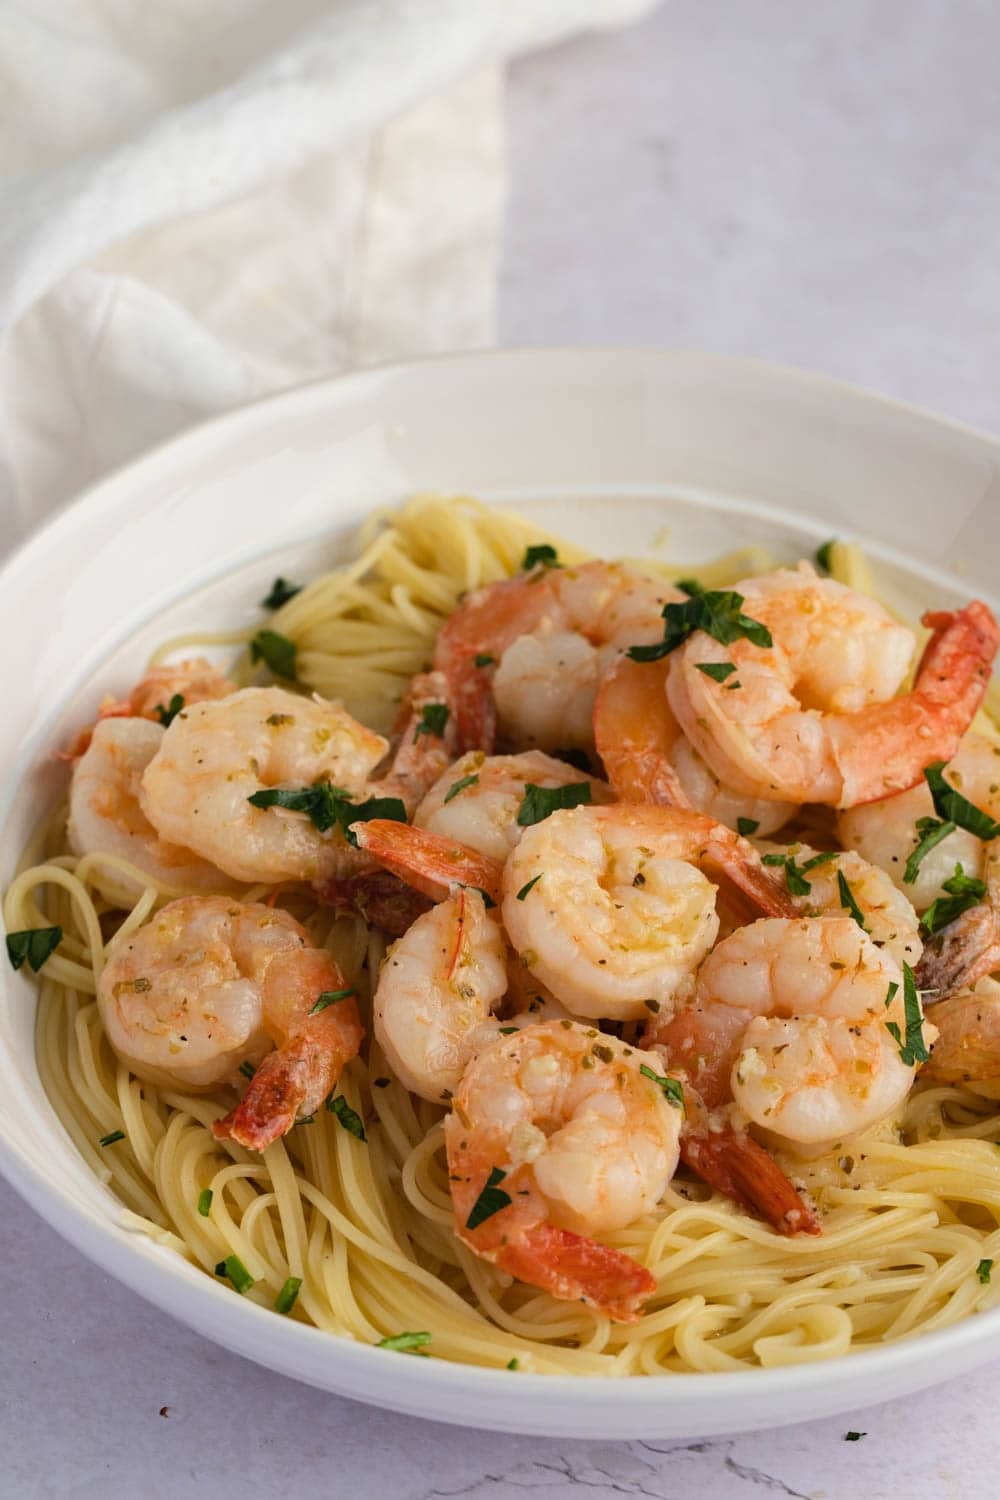 Buttery and Tender Red Lobster Shrimp Scampi with Pasta Served on a White Plate, Garnished with Chopped Parsley